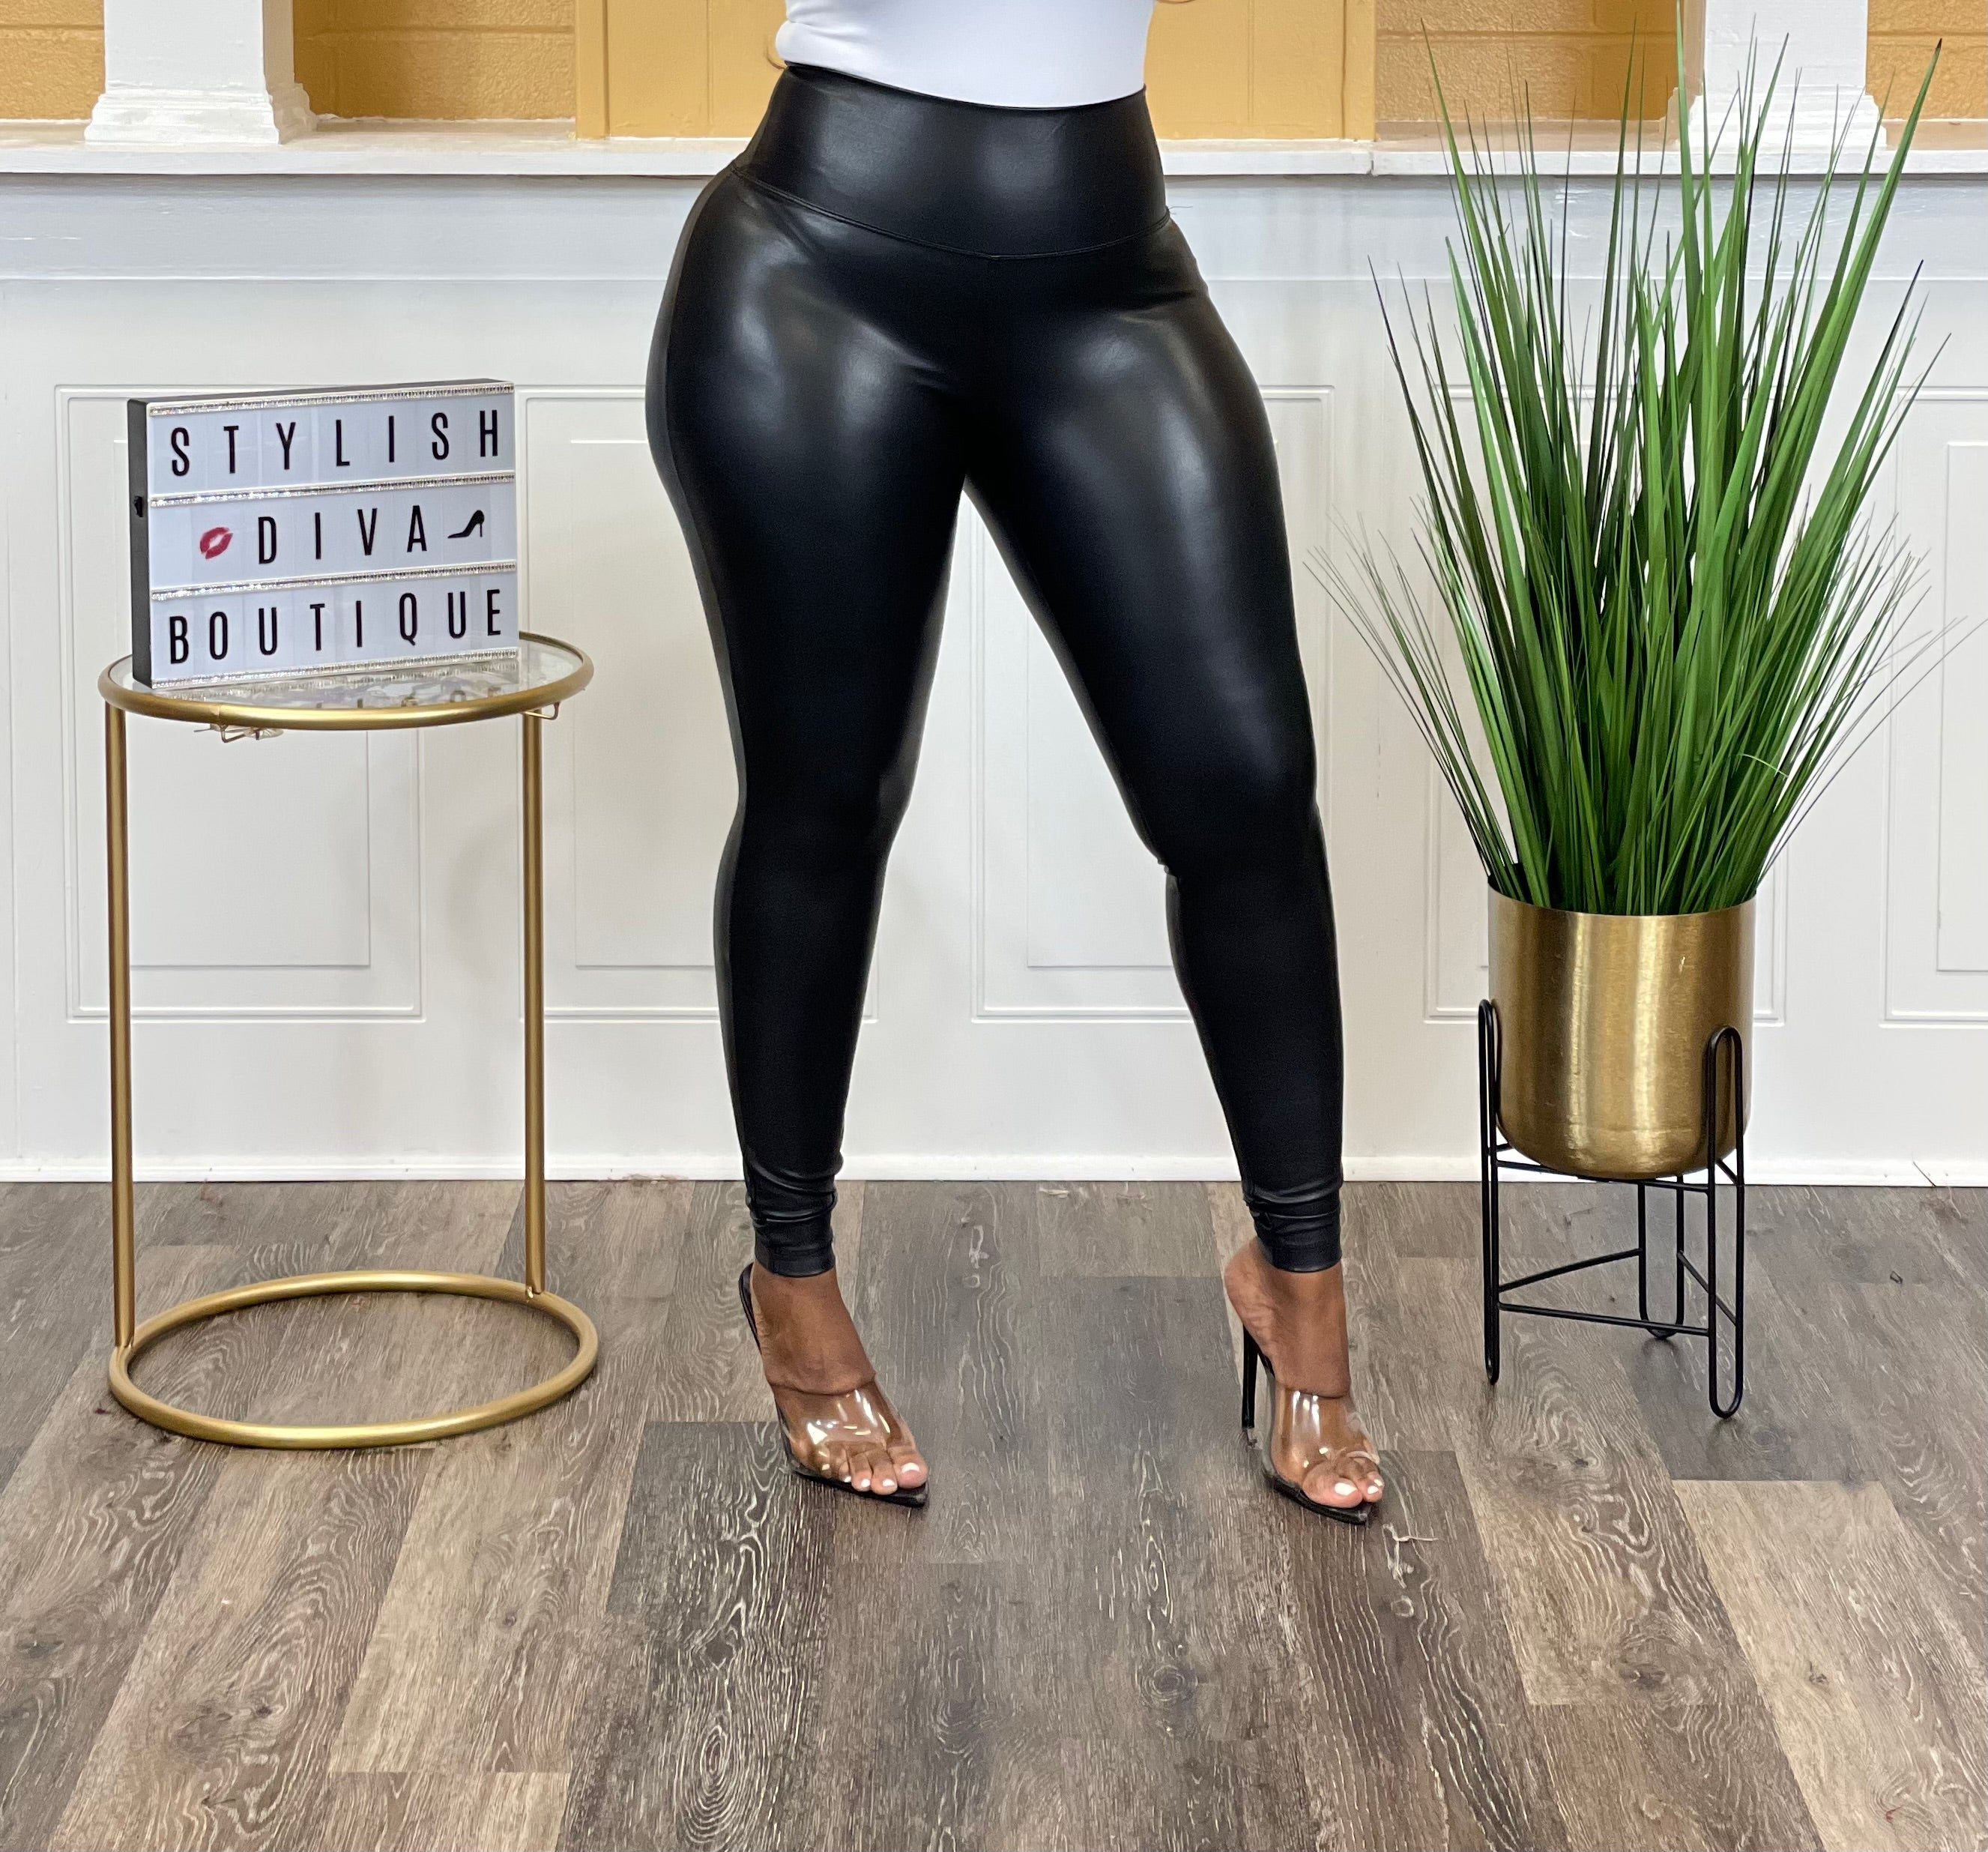 All You Could Want Black Faux Leather Leggings – Pink, 51% OFF